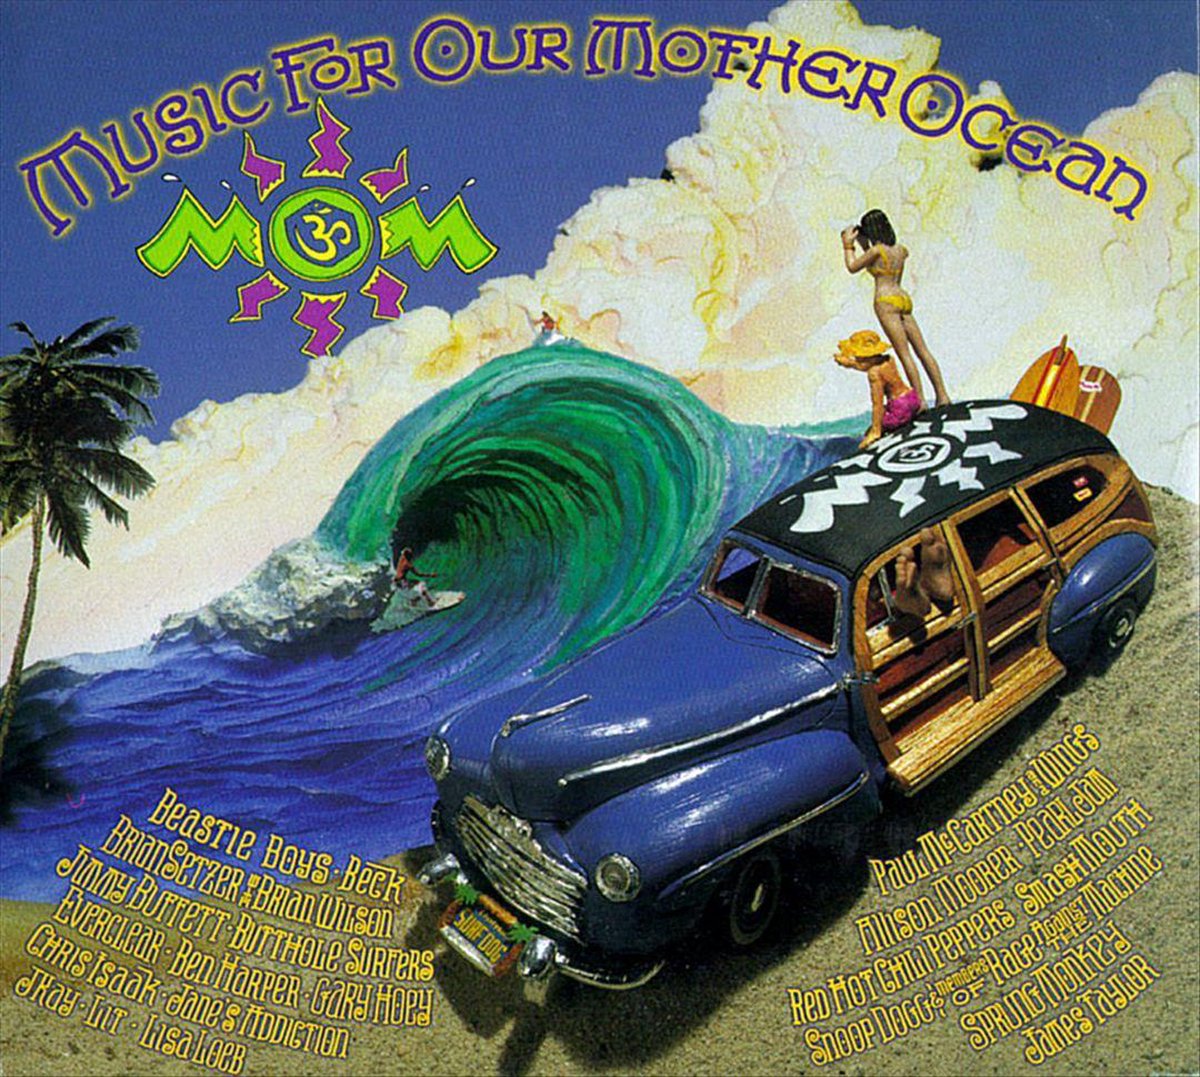 M.O.M., Vol. 3: Music for Our Mother Ocean - various artists